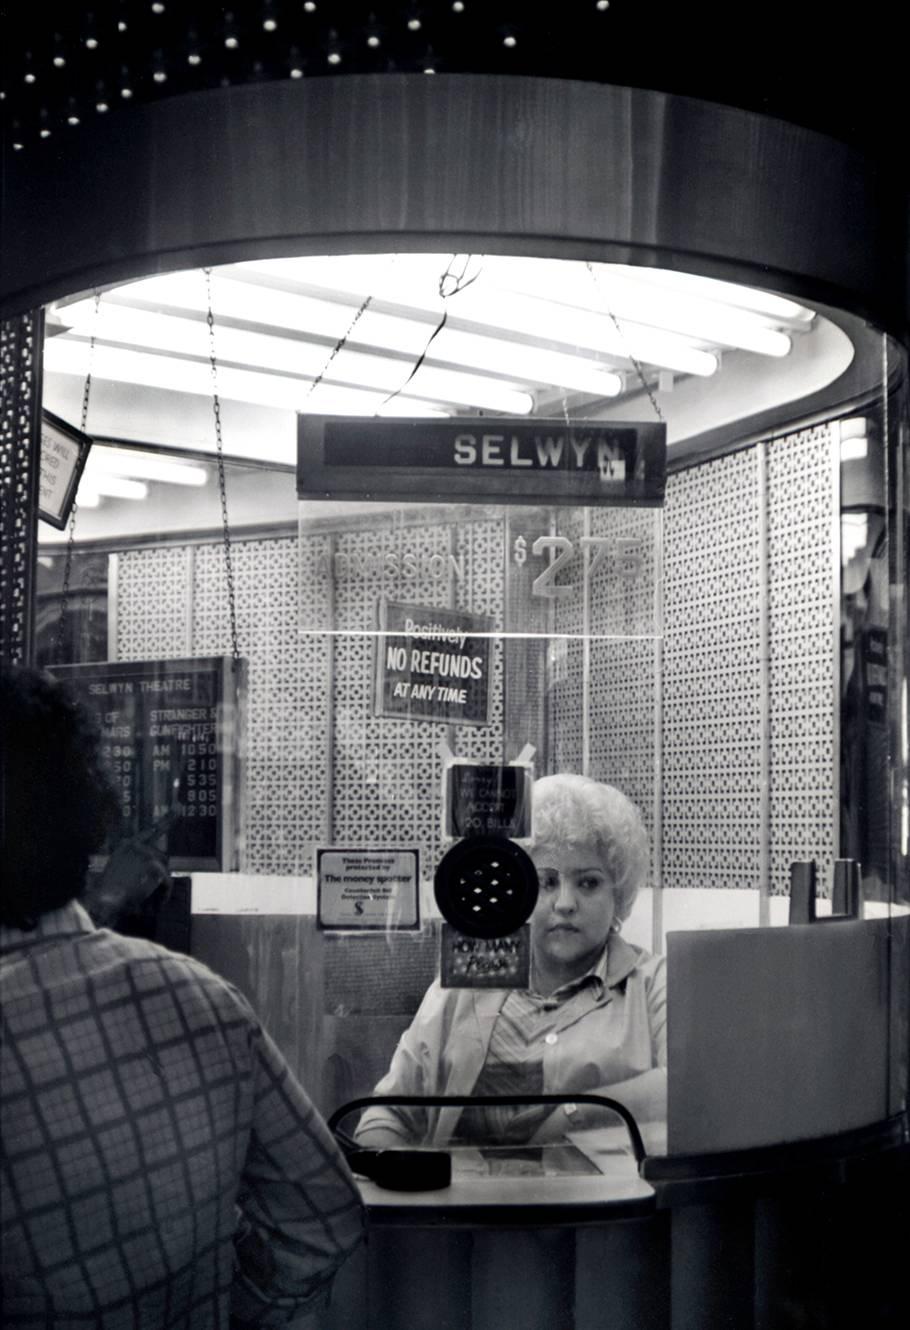 Black and White Photograph Fernando Natalici - "Ticket Lady", Times Square, New York, 1978